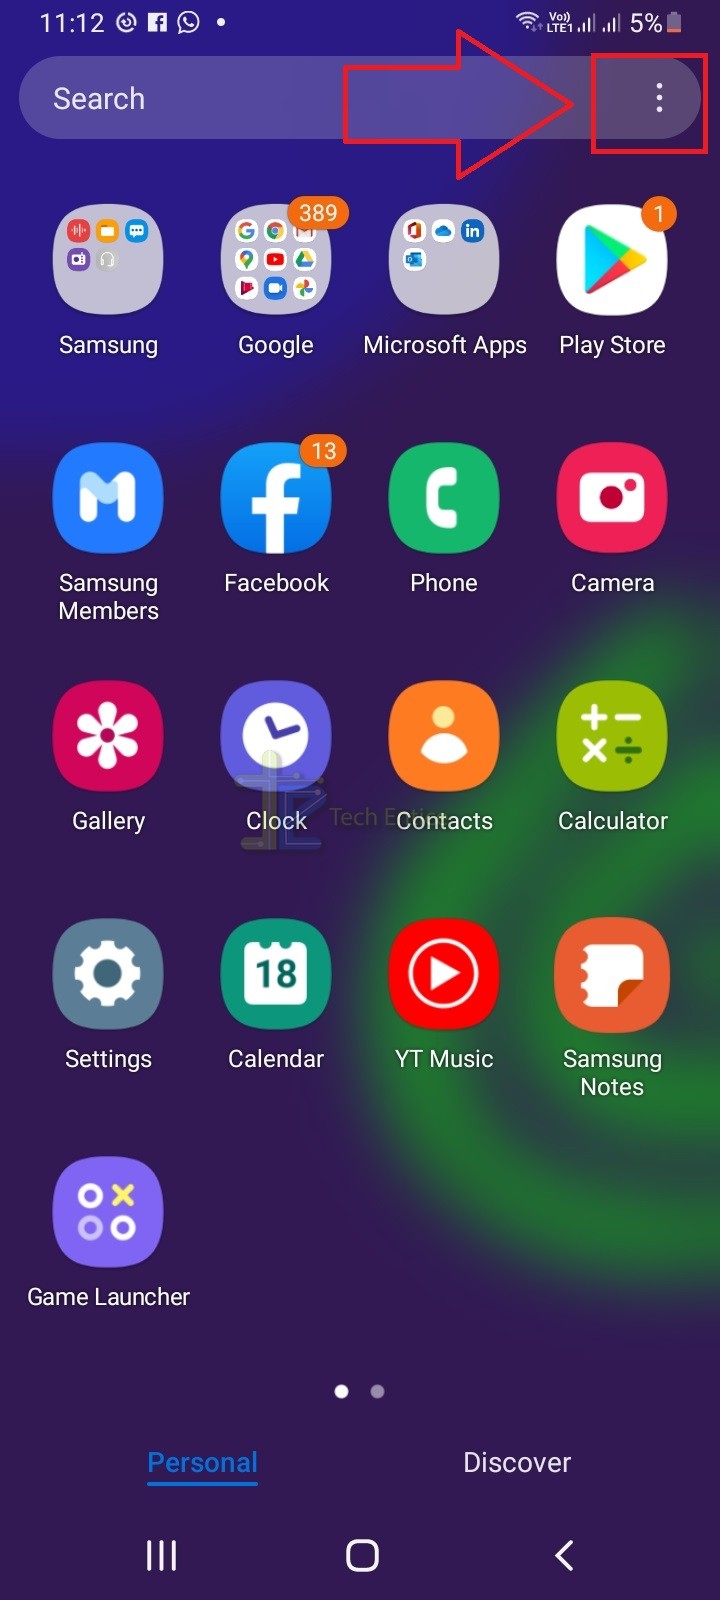 How do I turn off Discover on my Samsung smartphone